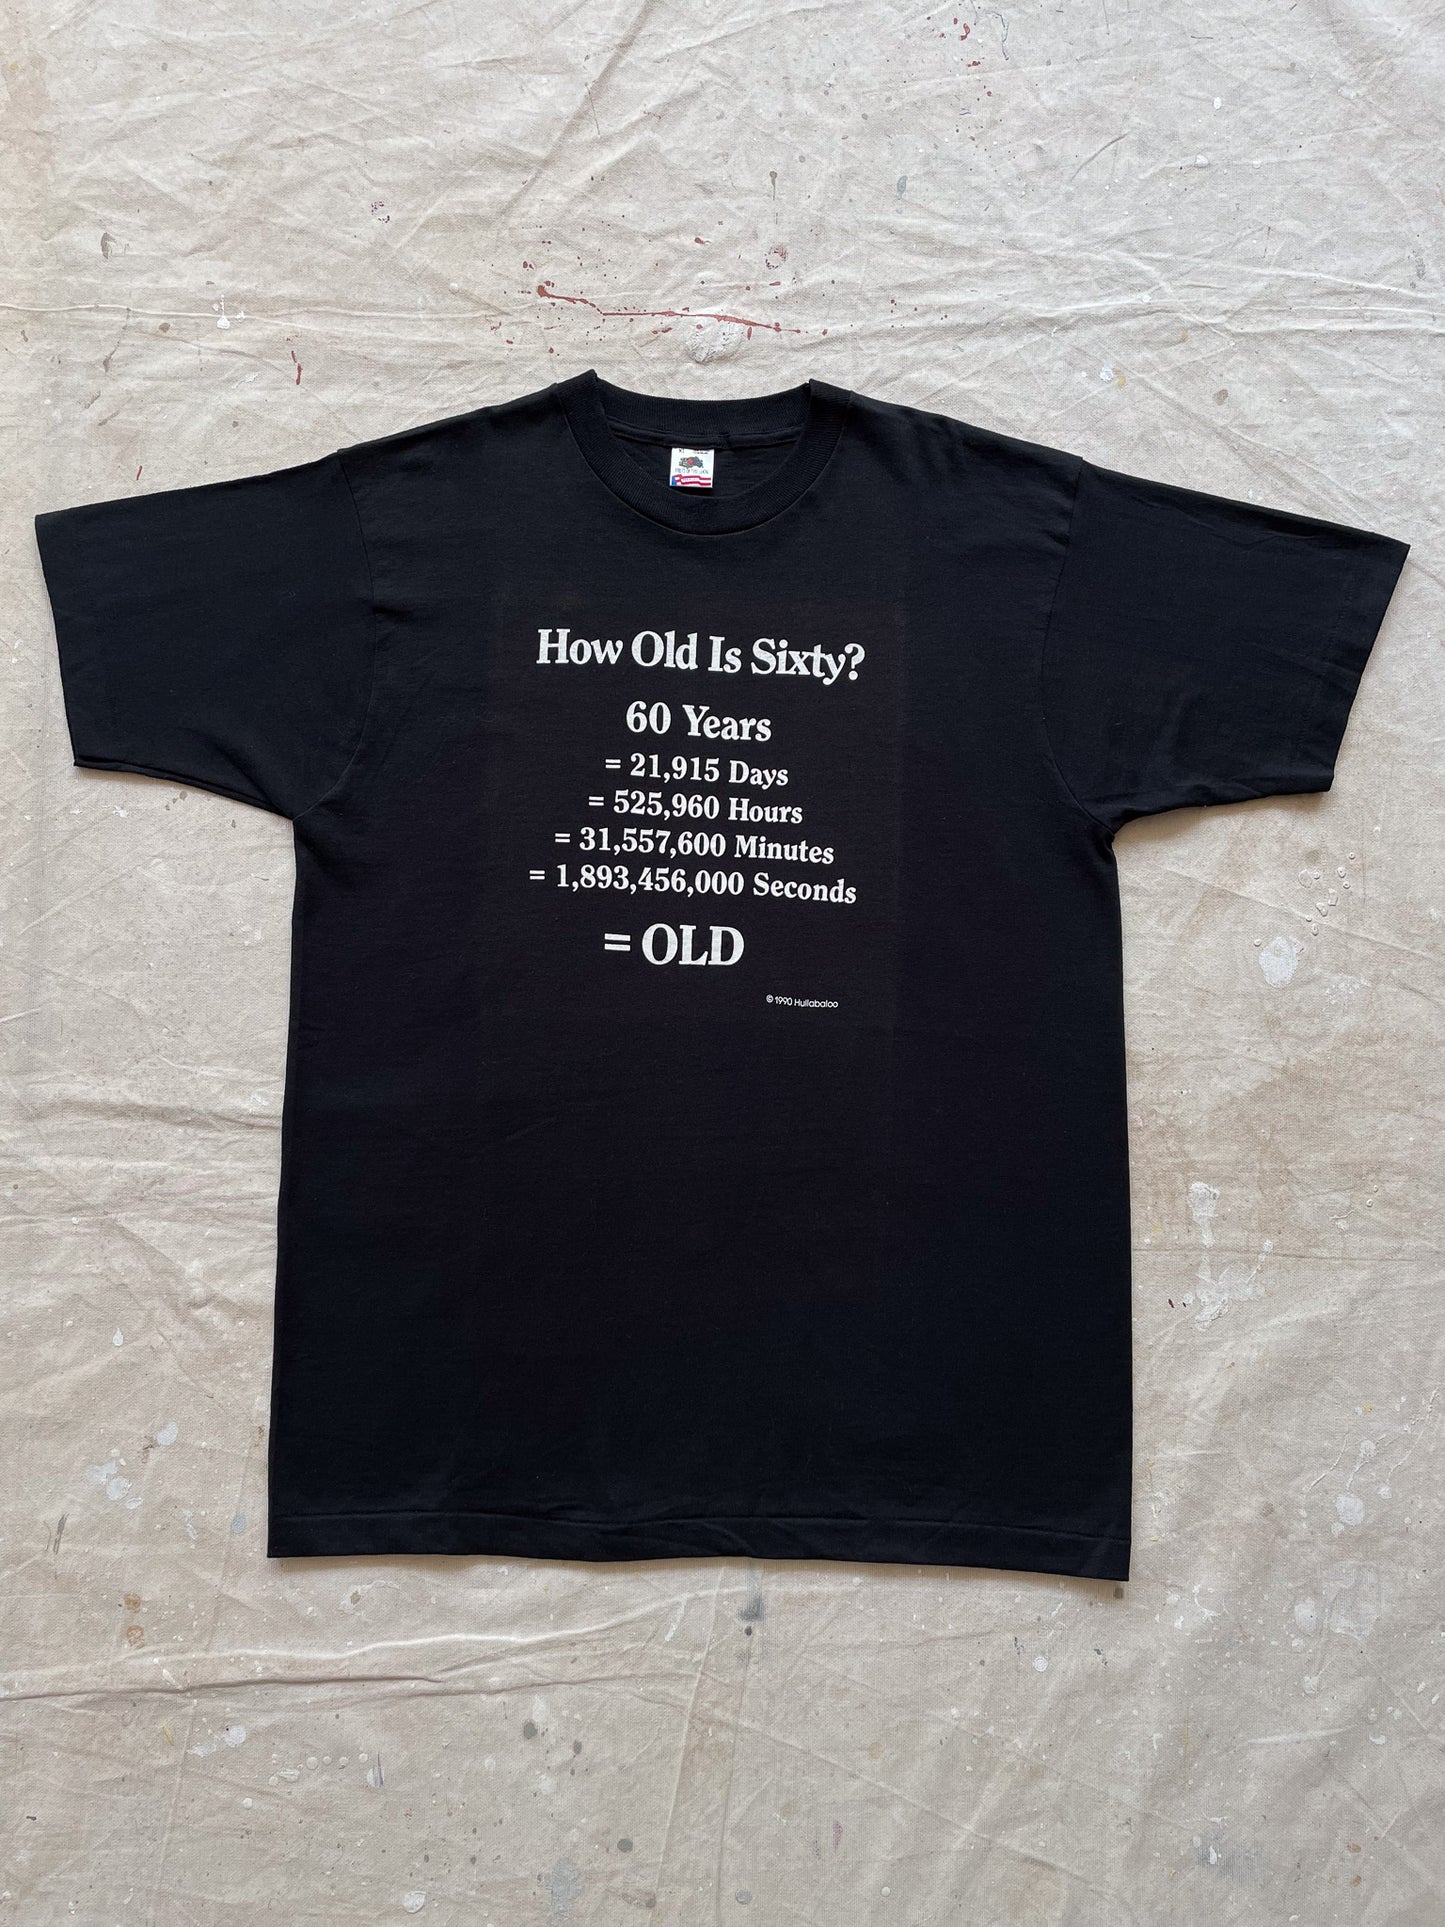 "How Old Is Sixty?" T-Shirt—[XL]